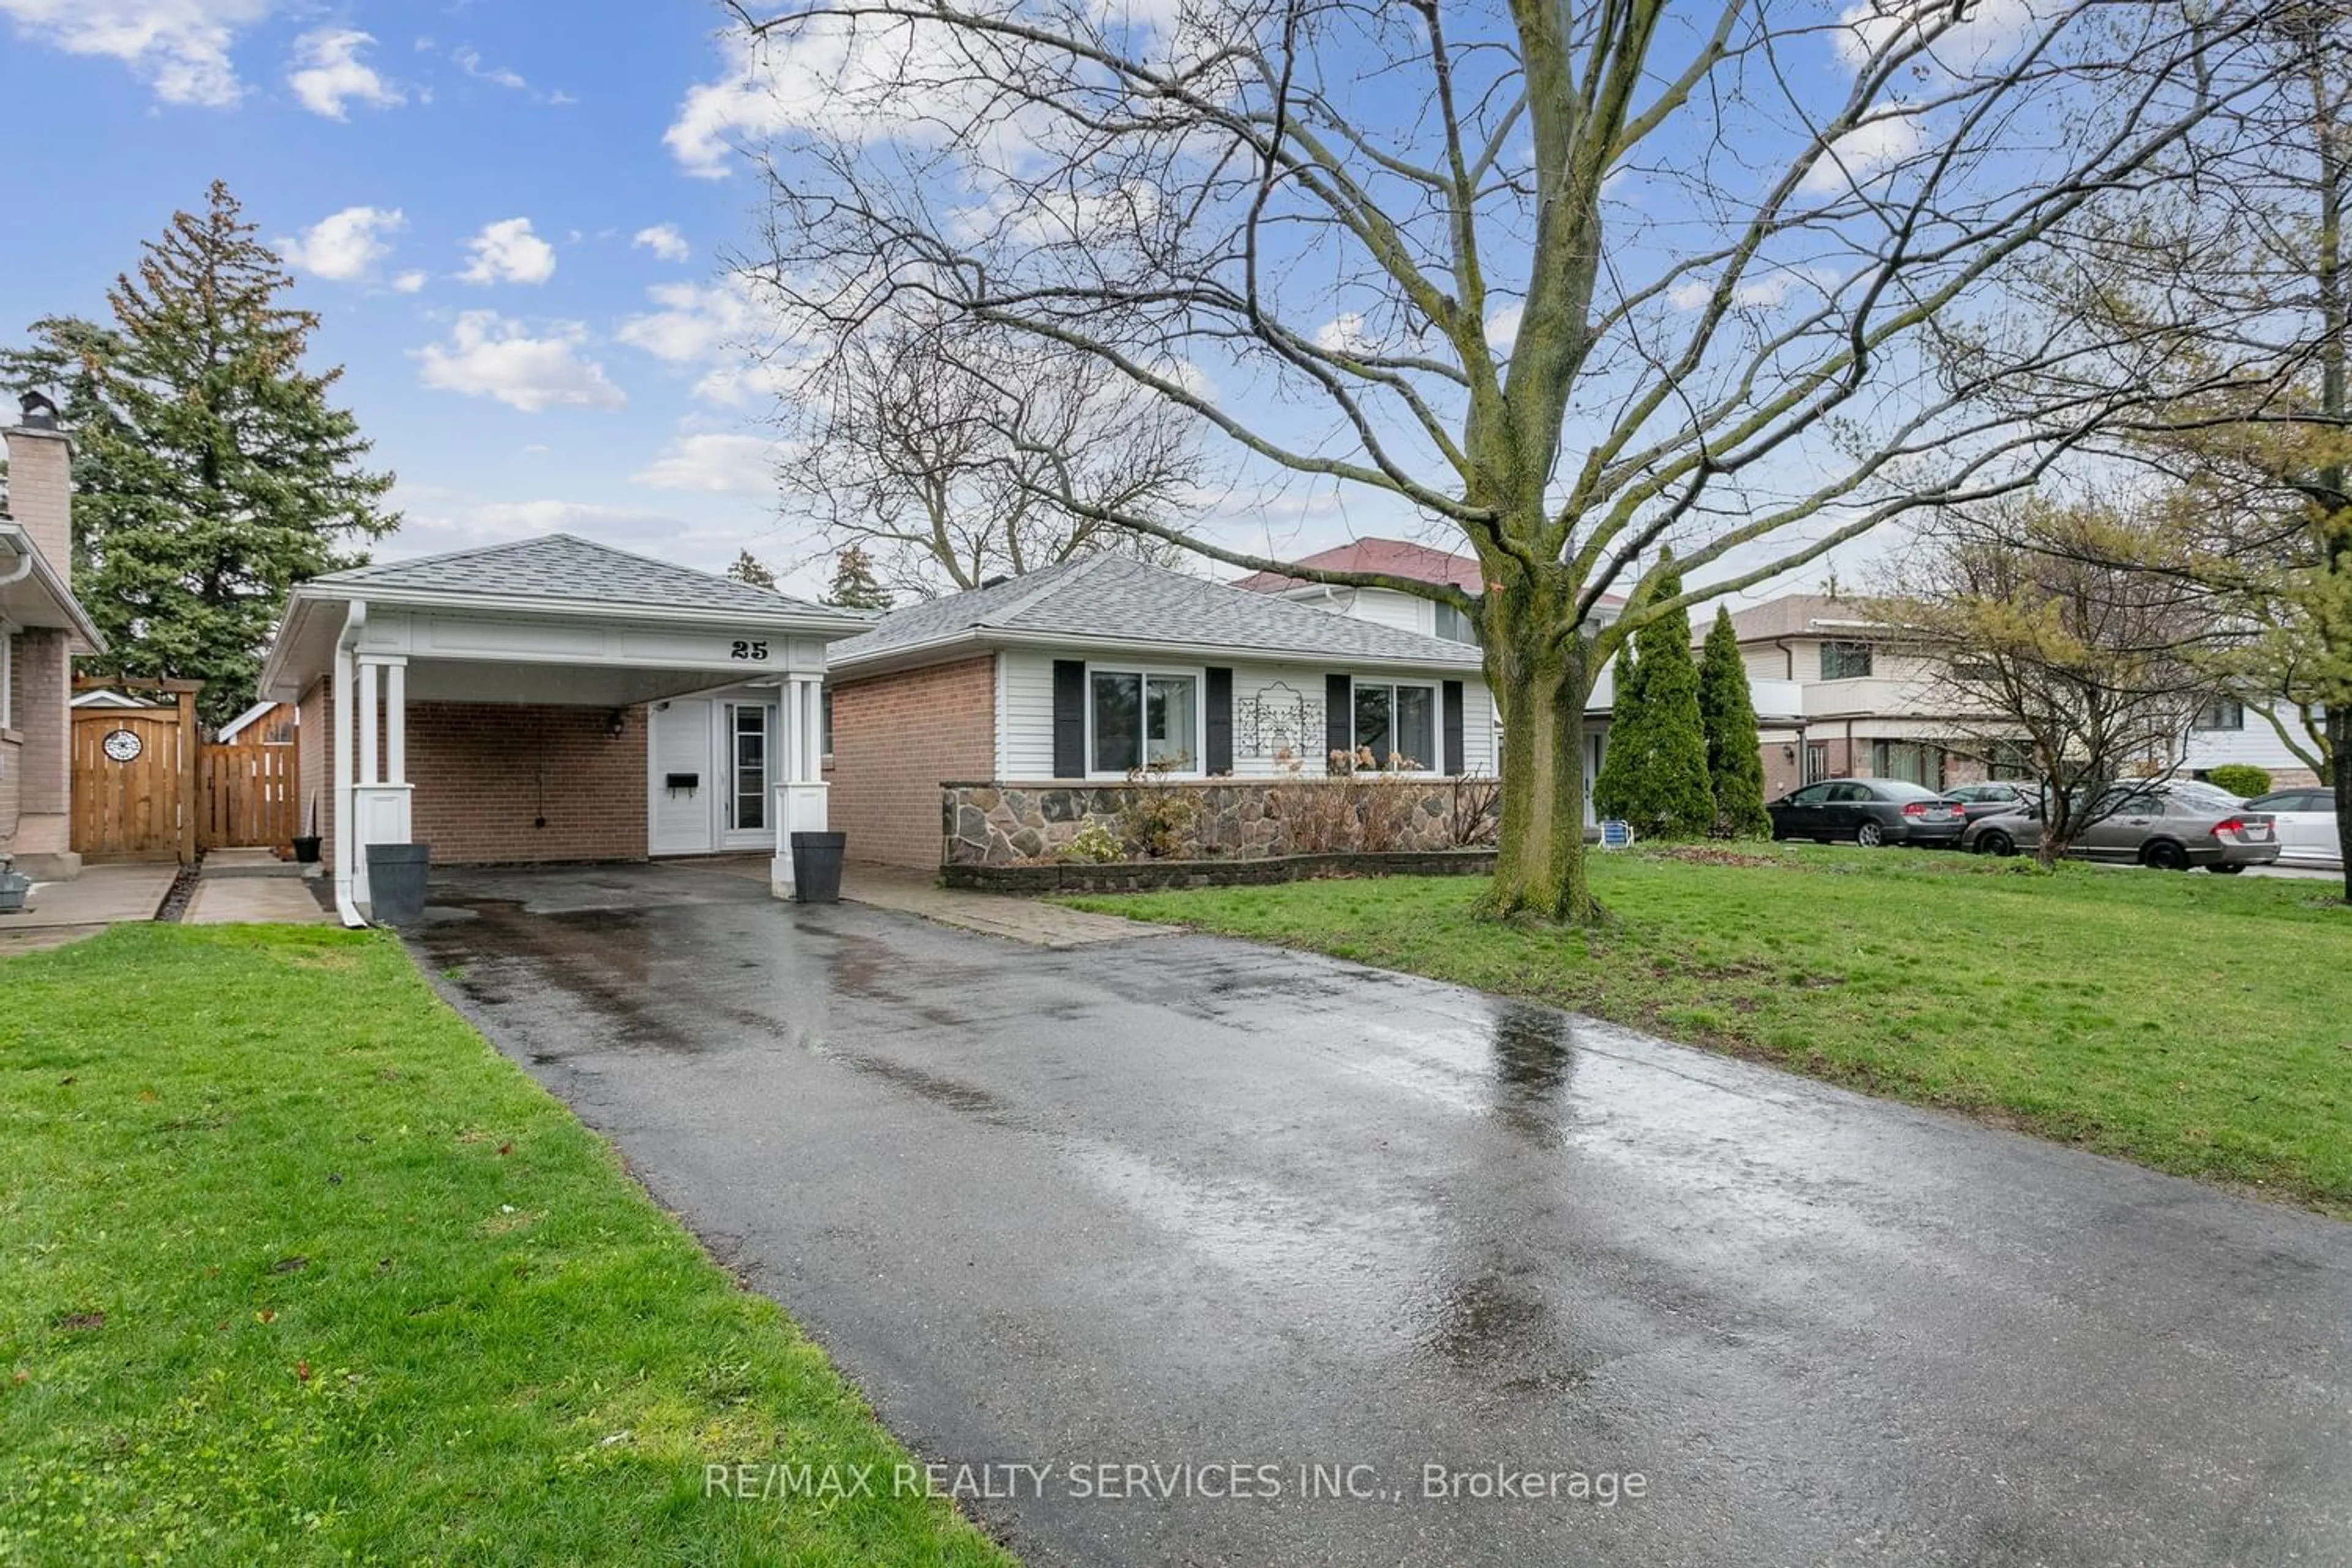 Frontside or backside of a home for 25 Allendale Rd, Brampton Ontario L6W 2Y7